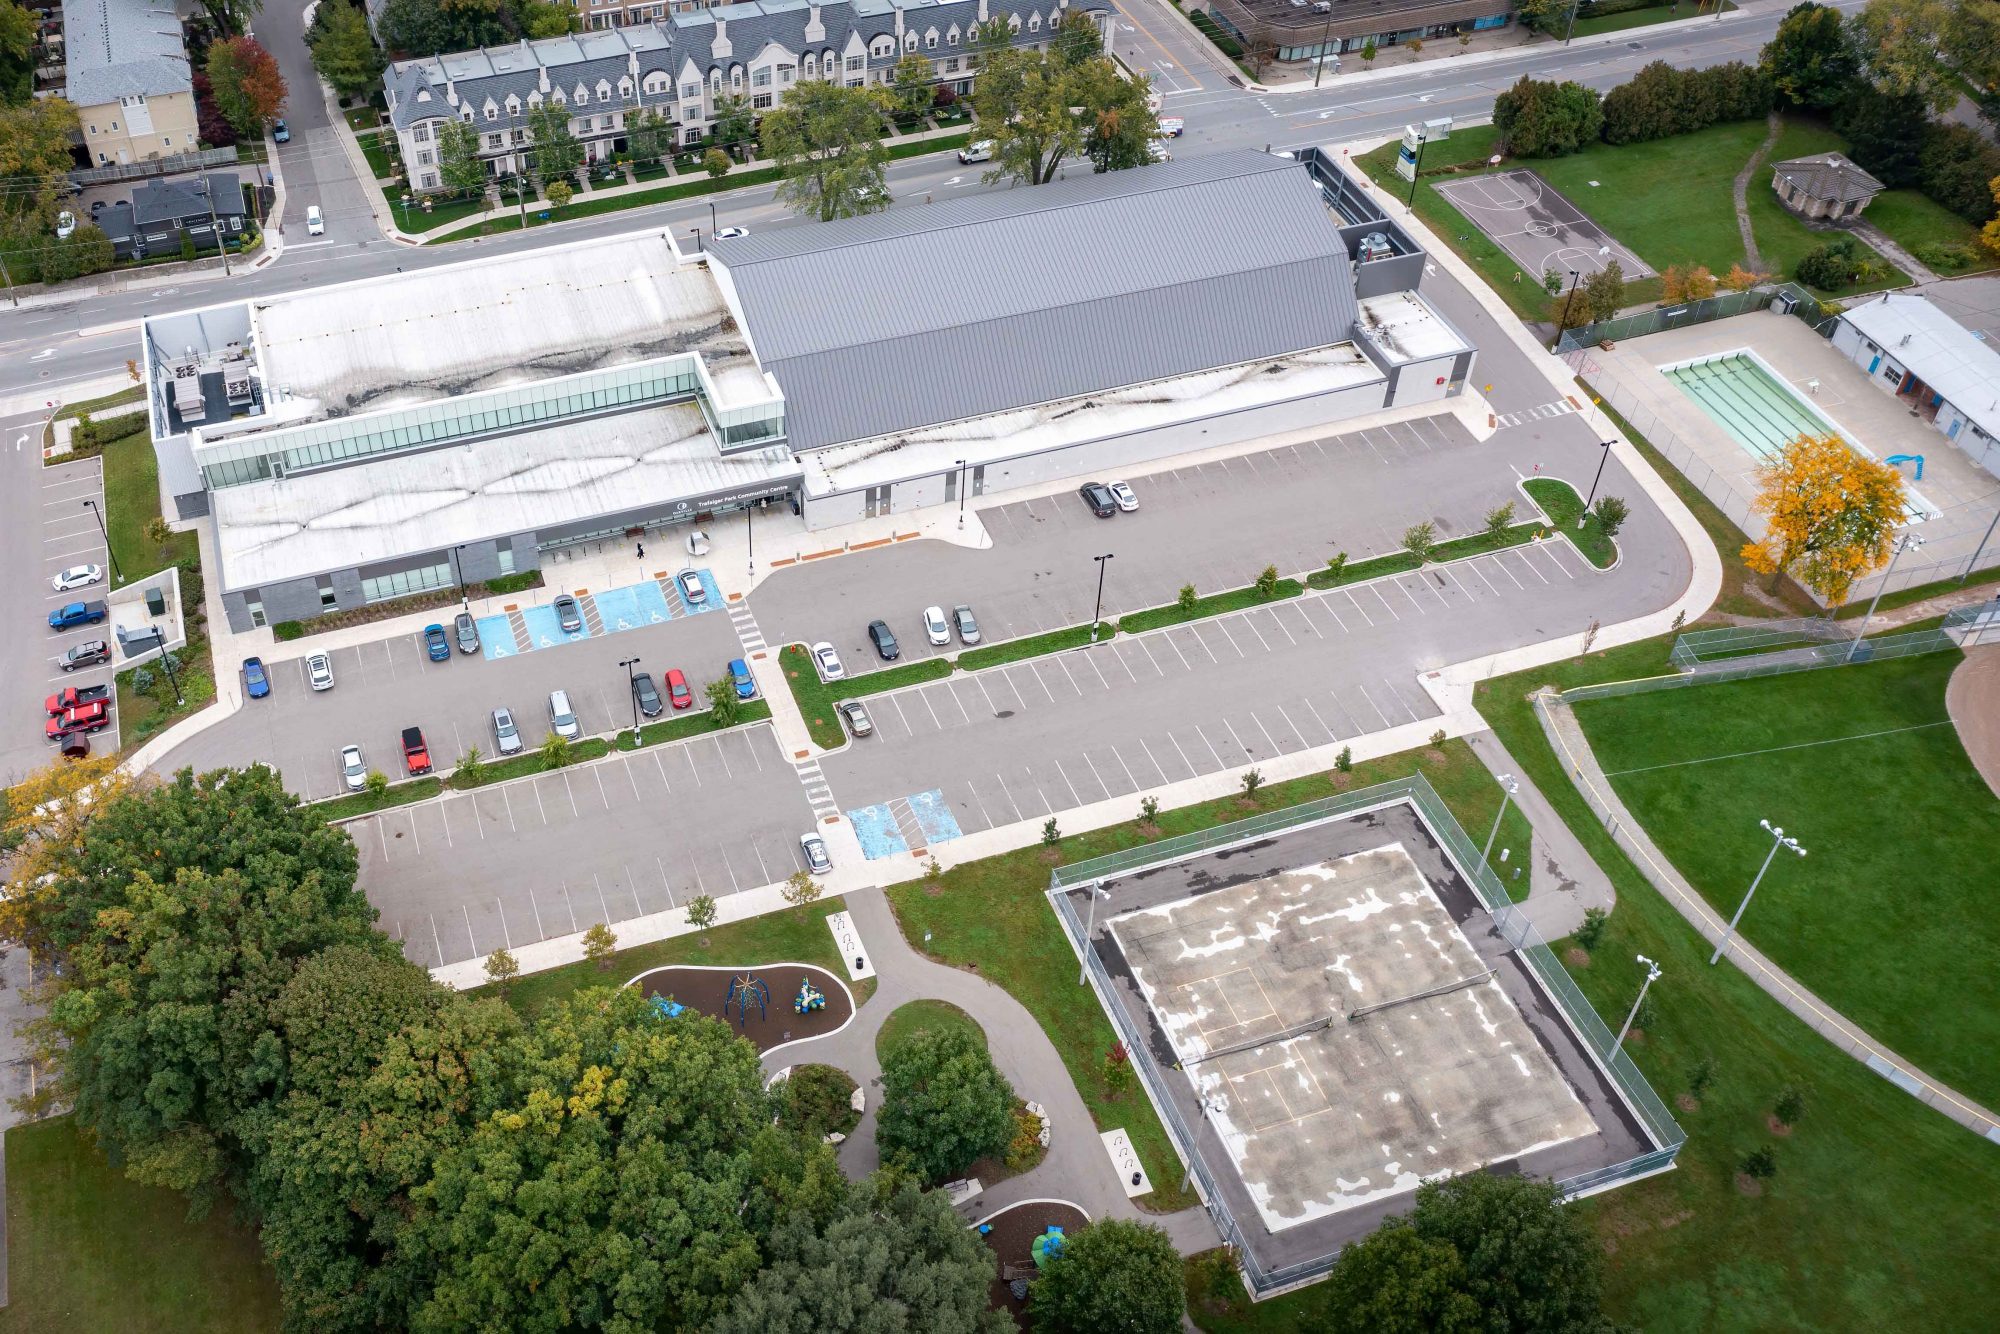 Aerial view of community centre and parking lot with tennis court and playground in the frame.